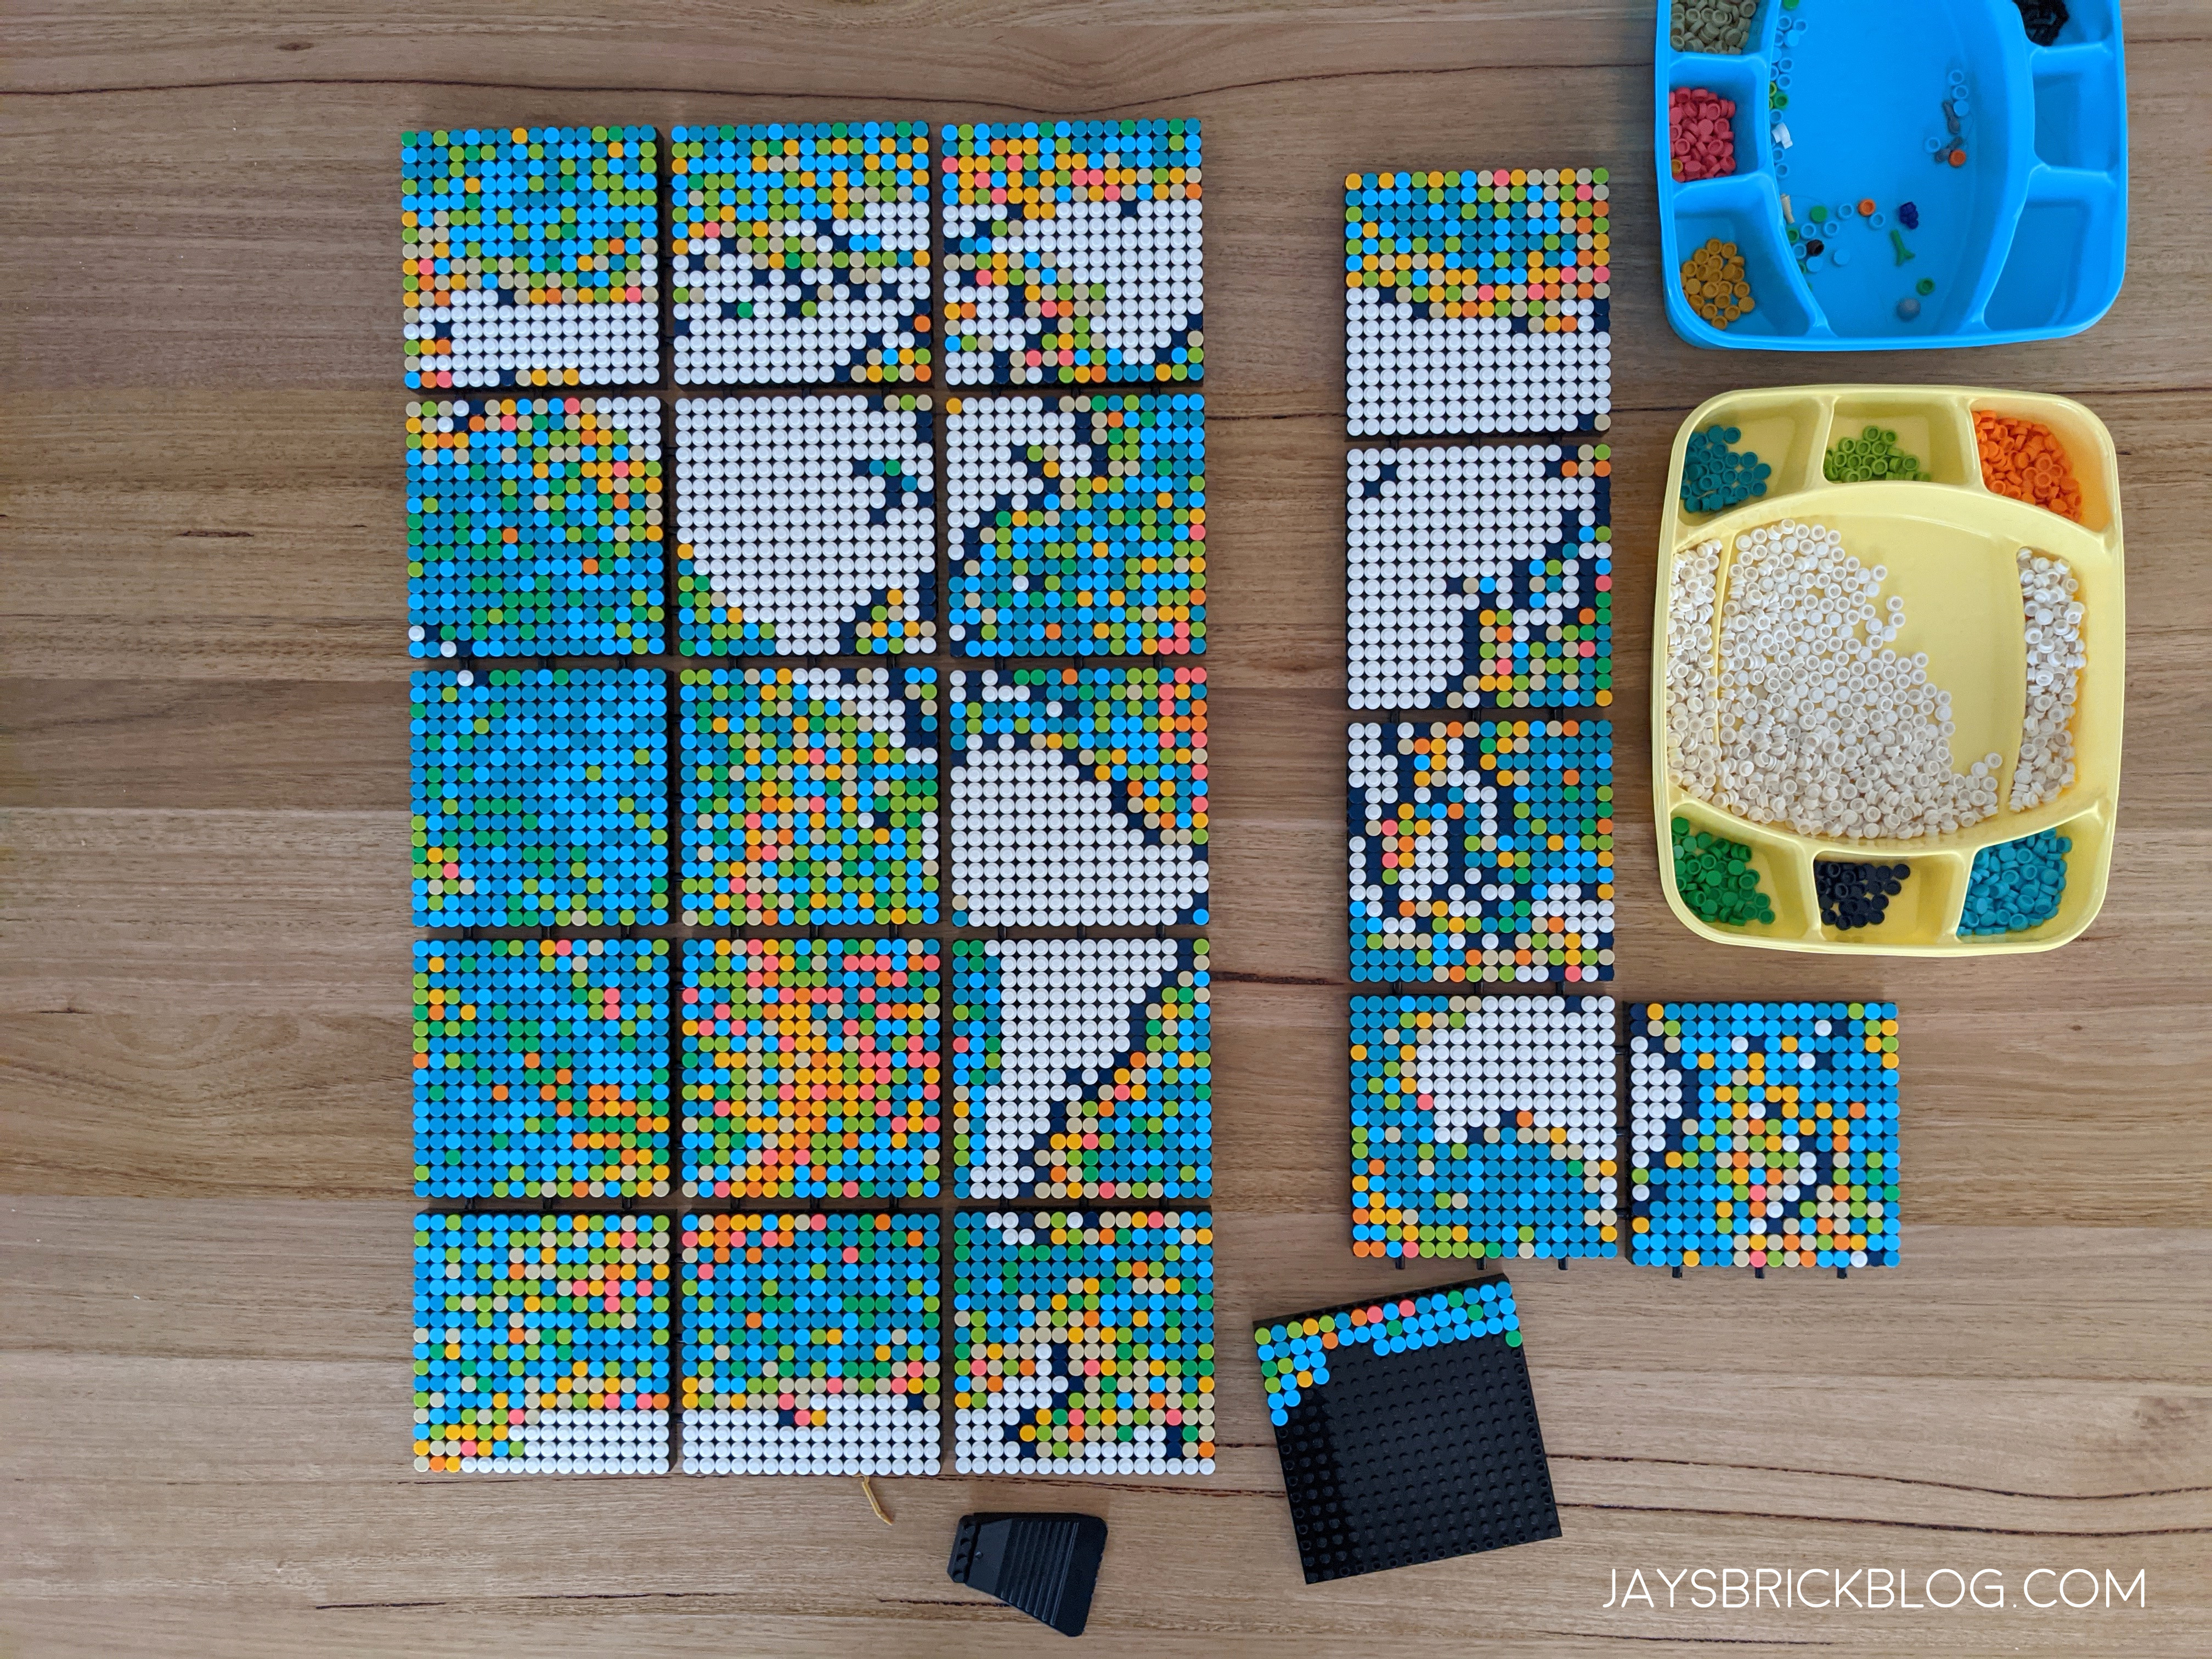 lego art world map review